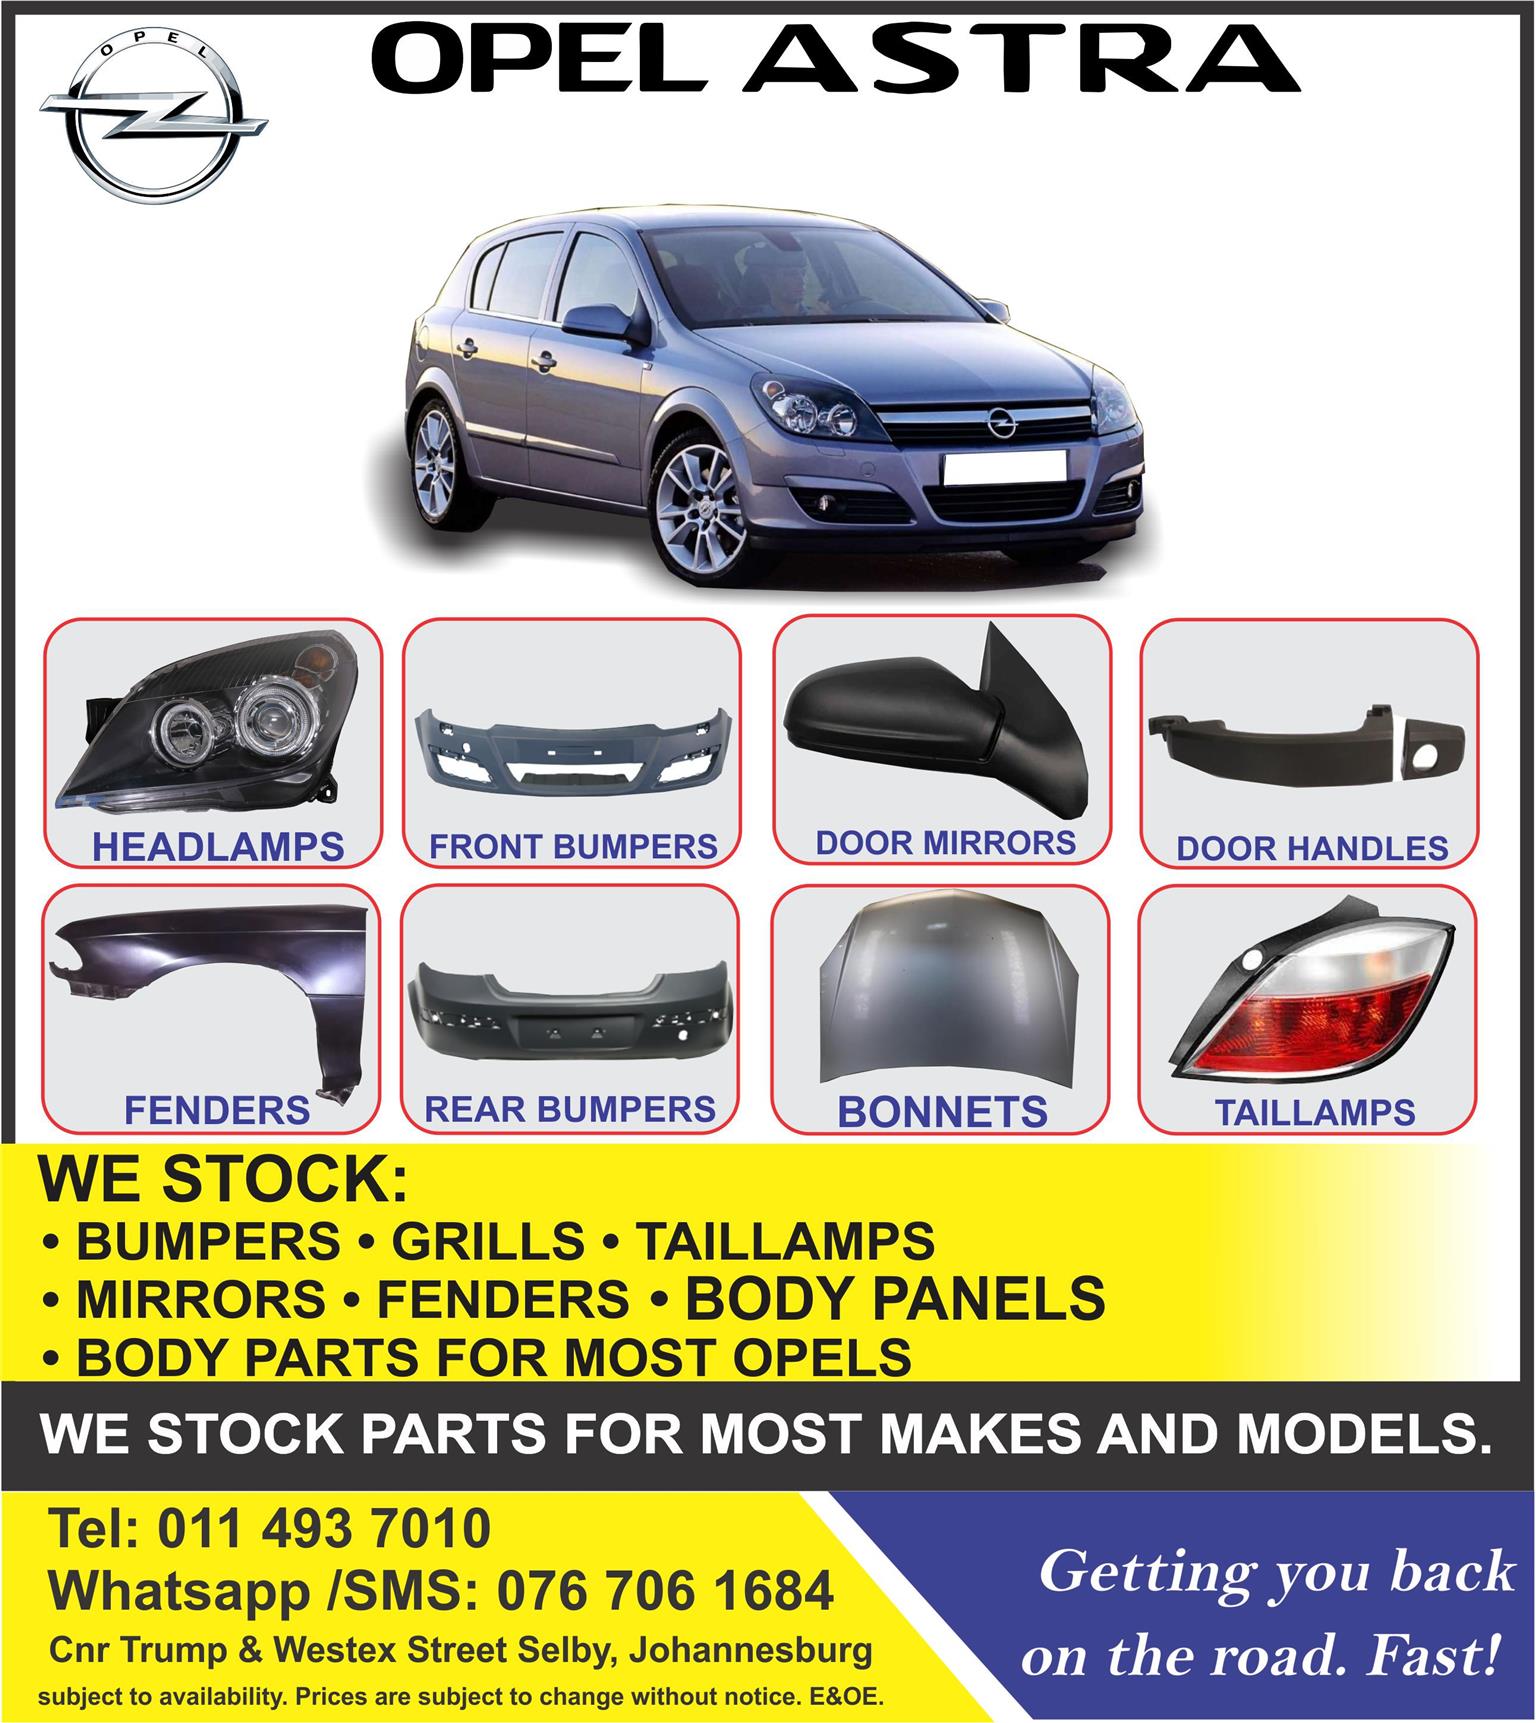 Opel Astra Parts and Spares | Junk Mail